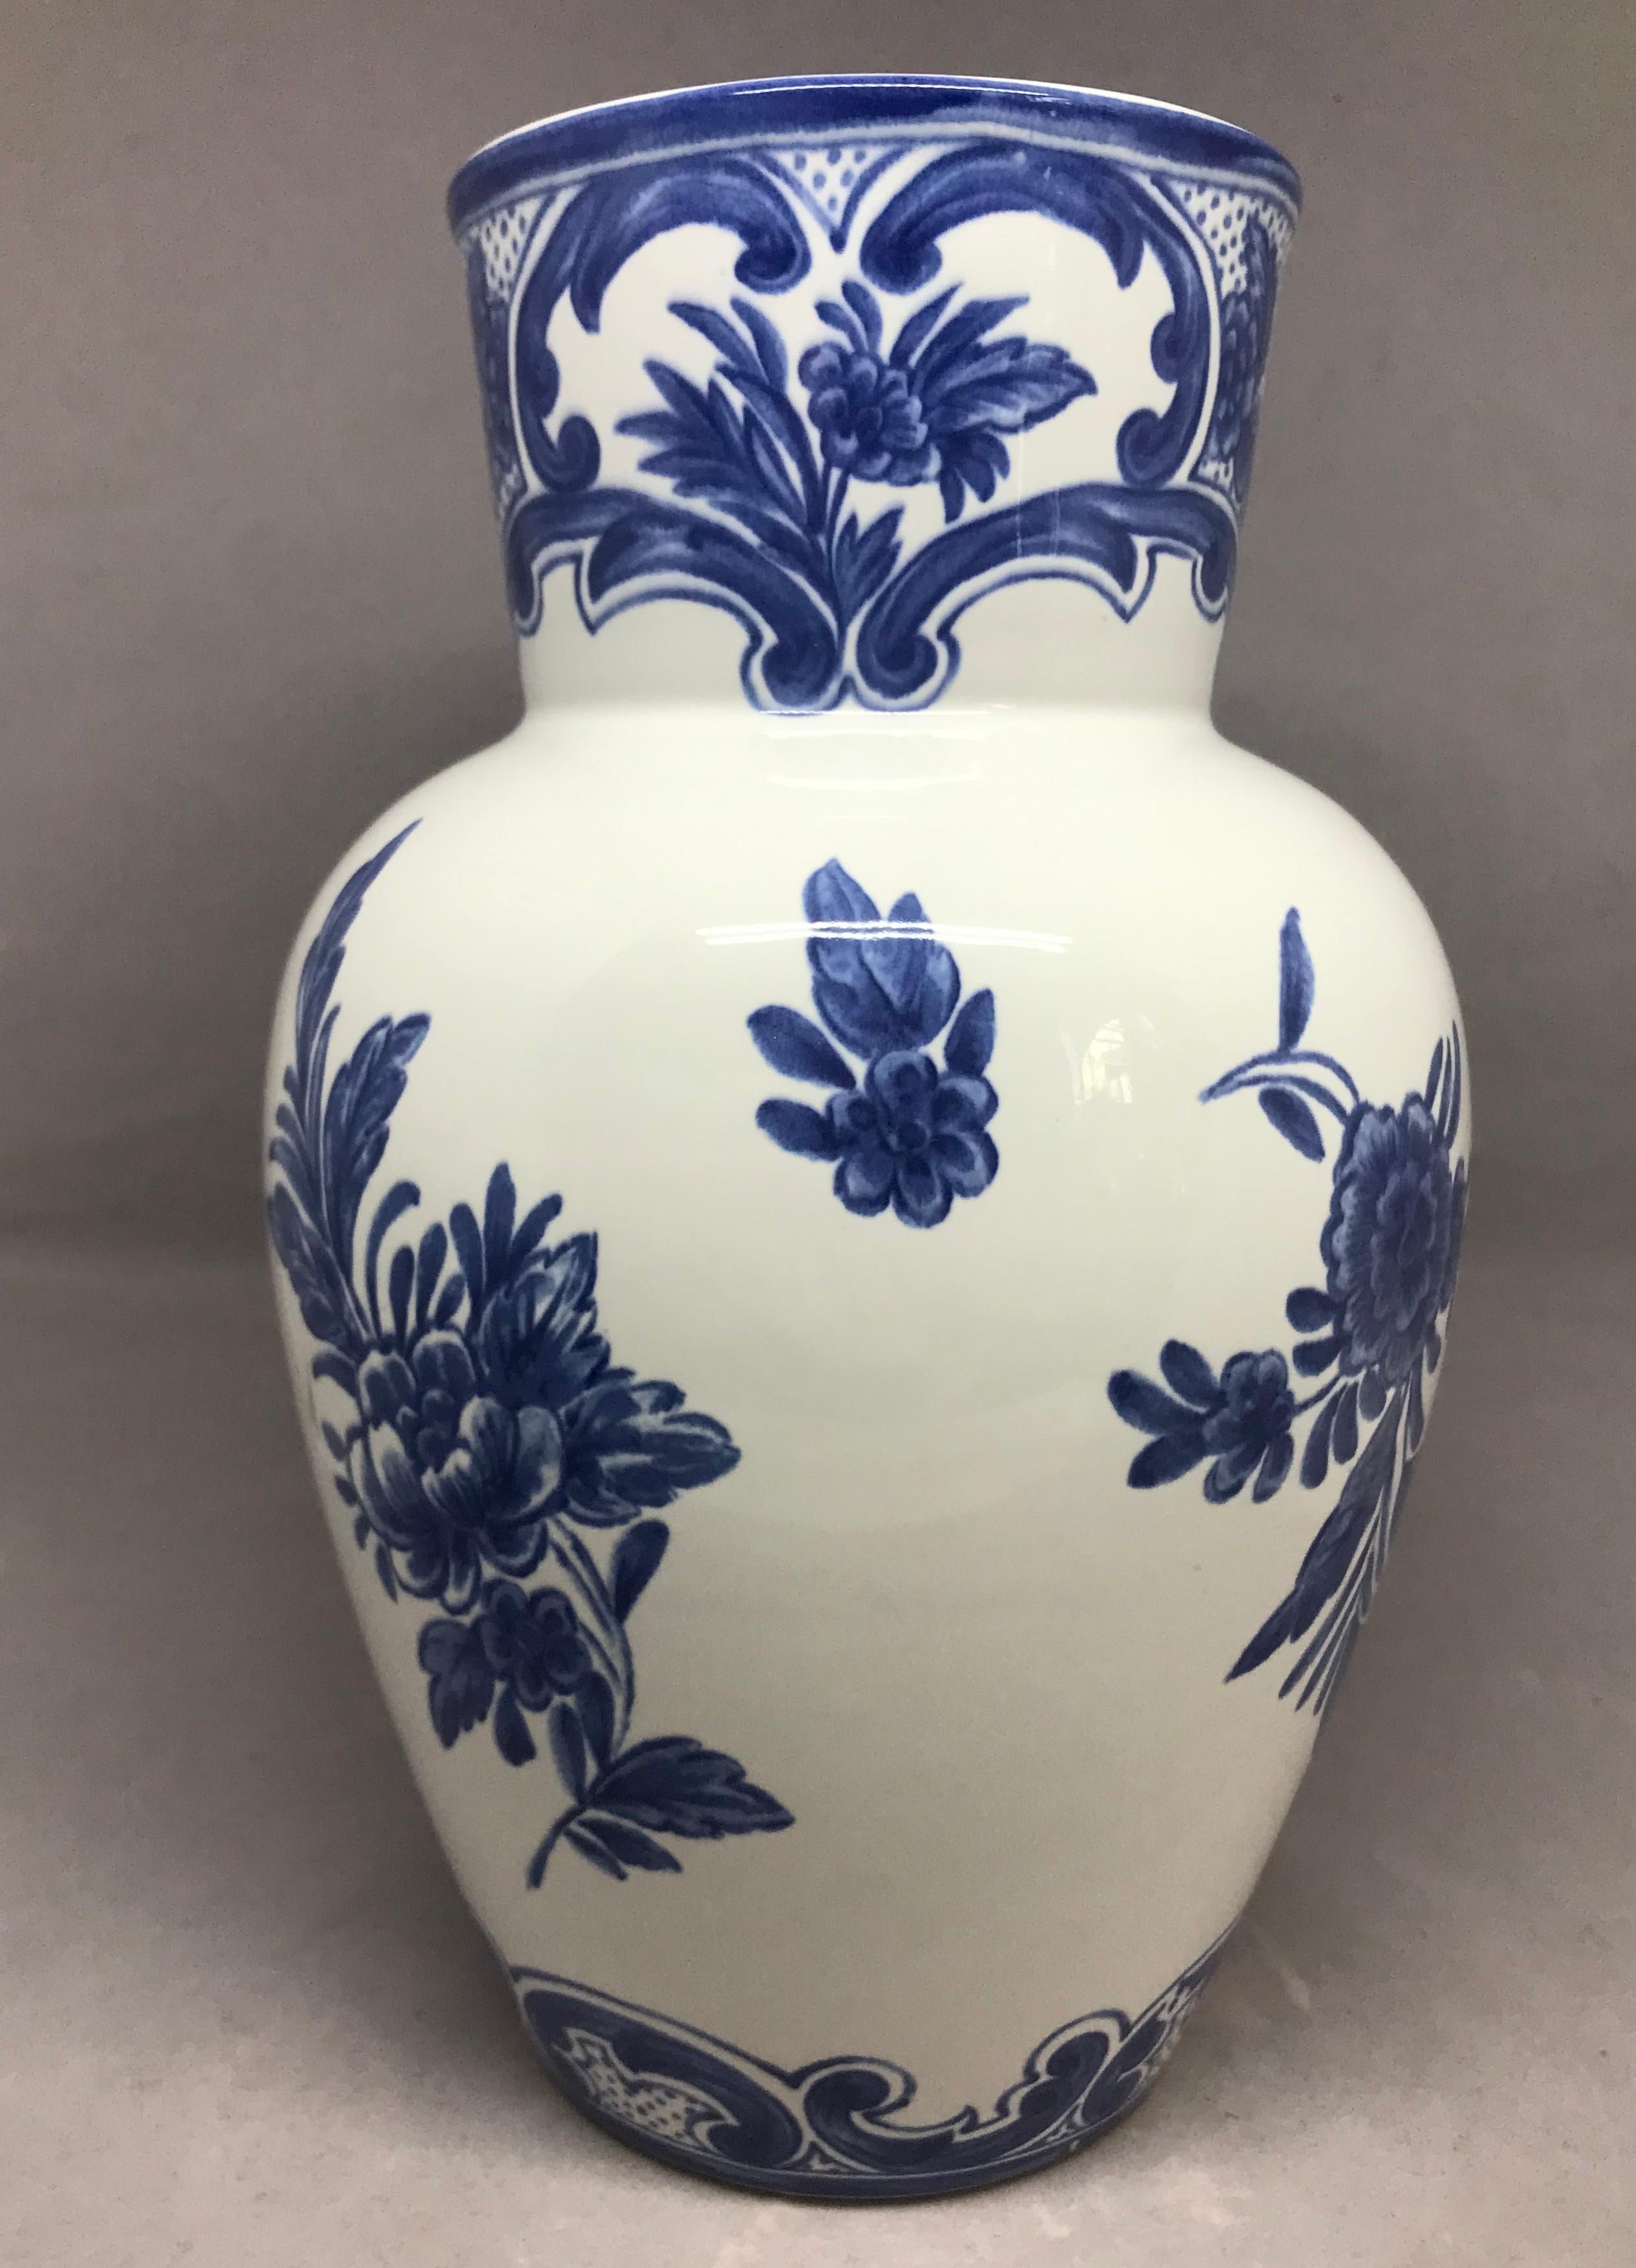 Painted Blue and White Delft Tiffany & Co. Vase